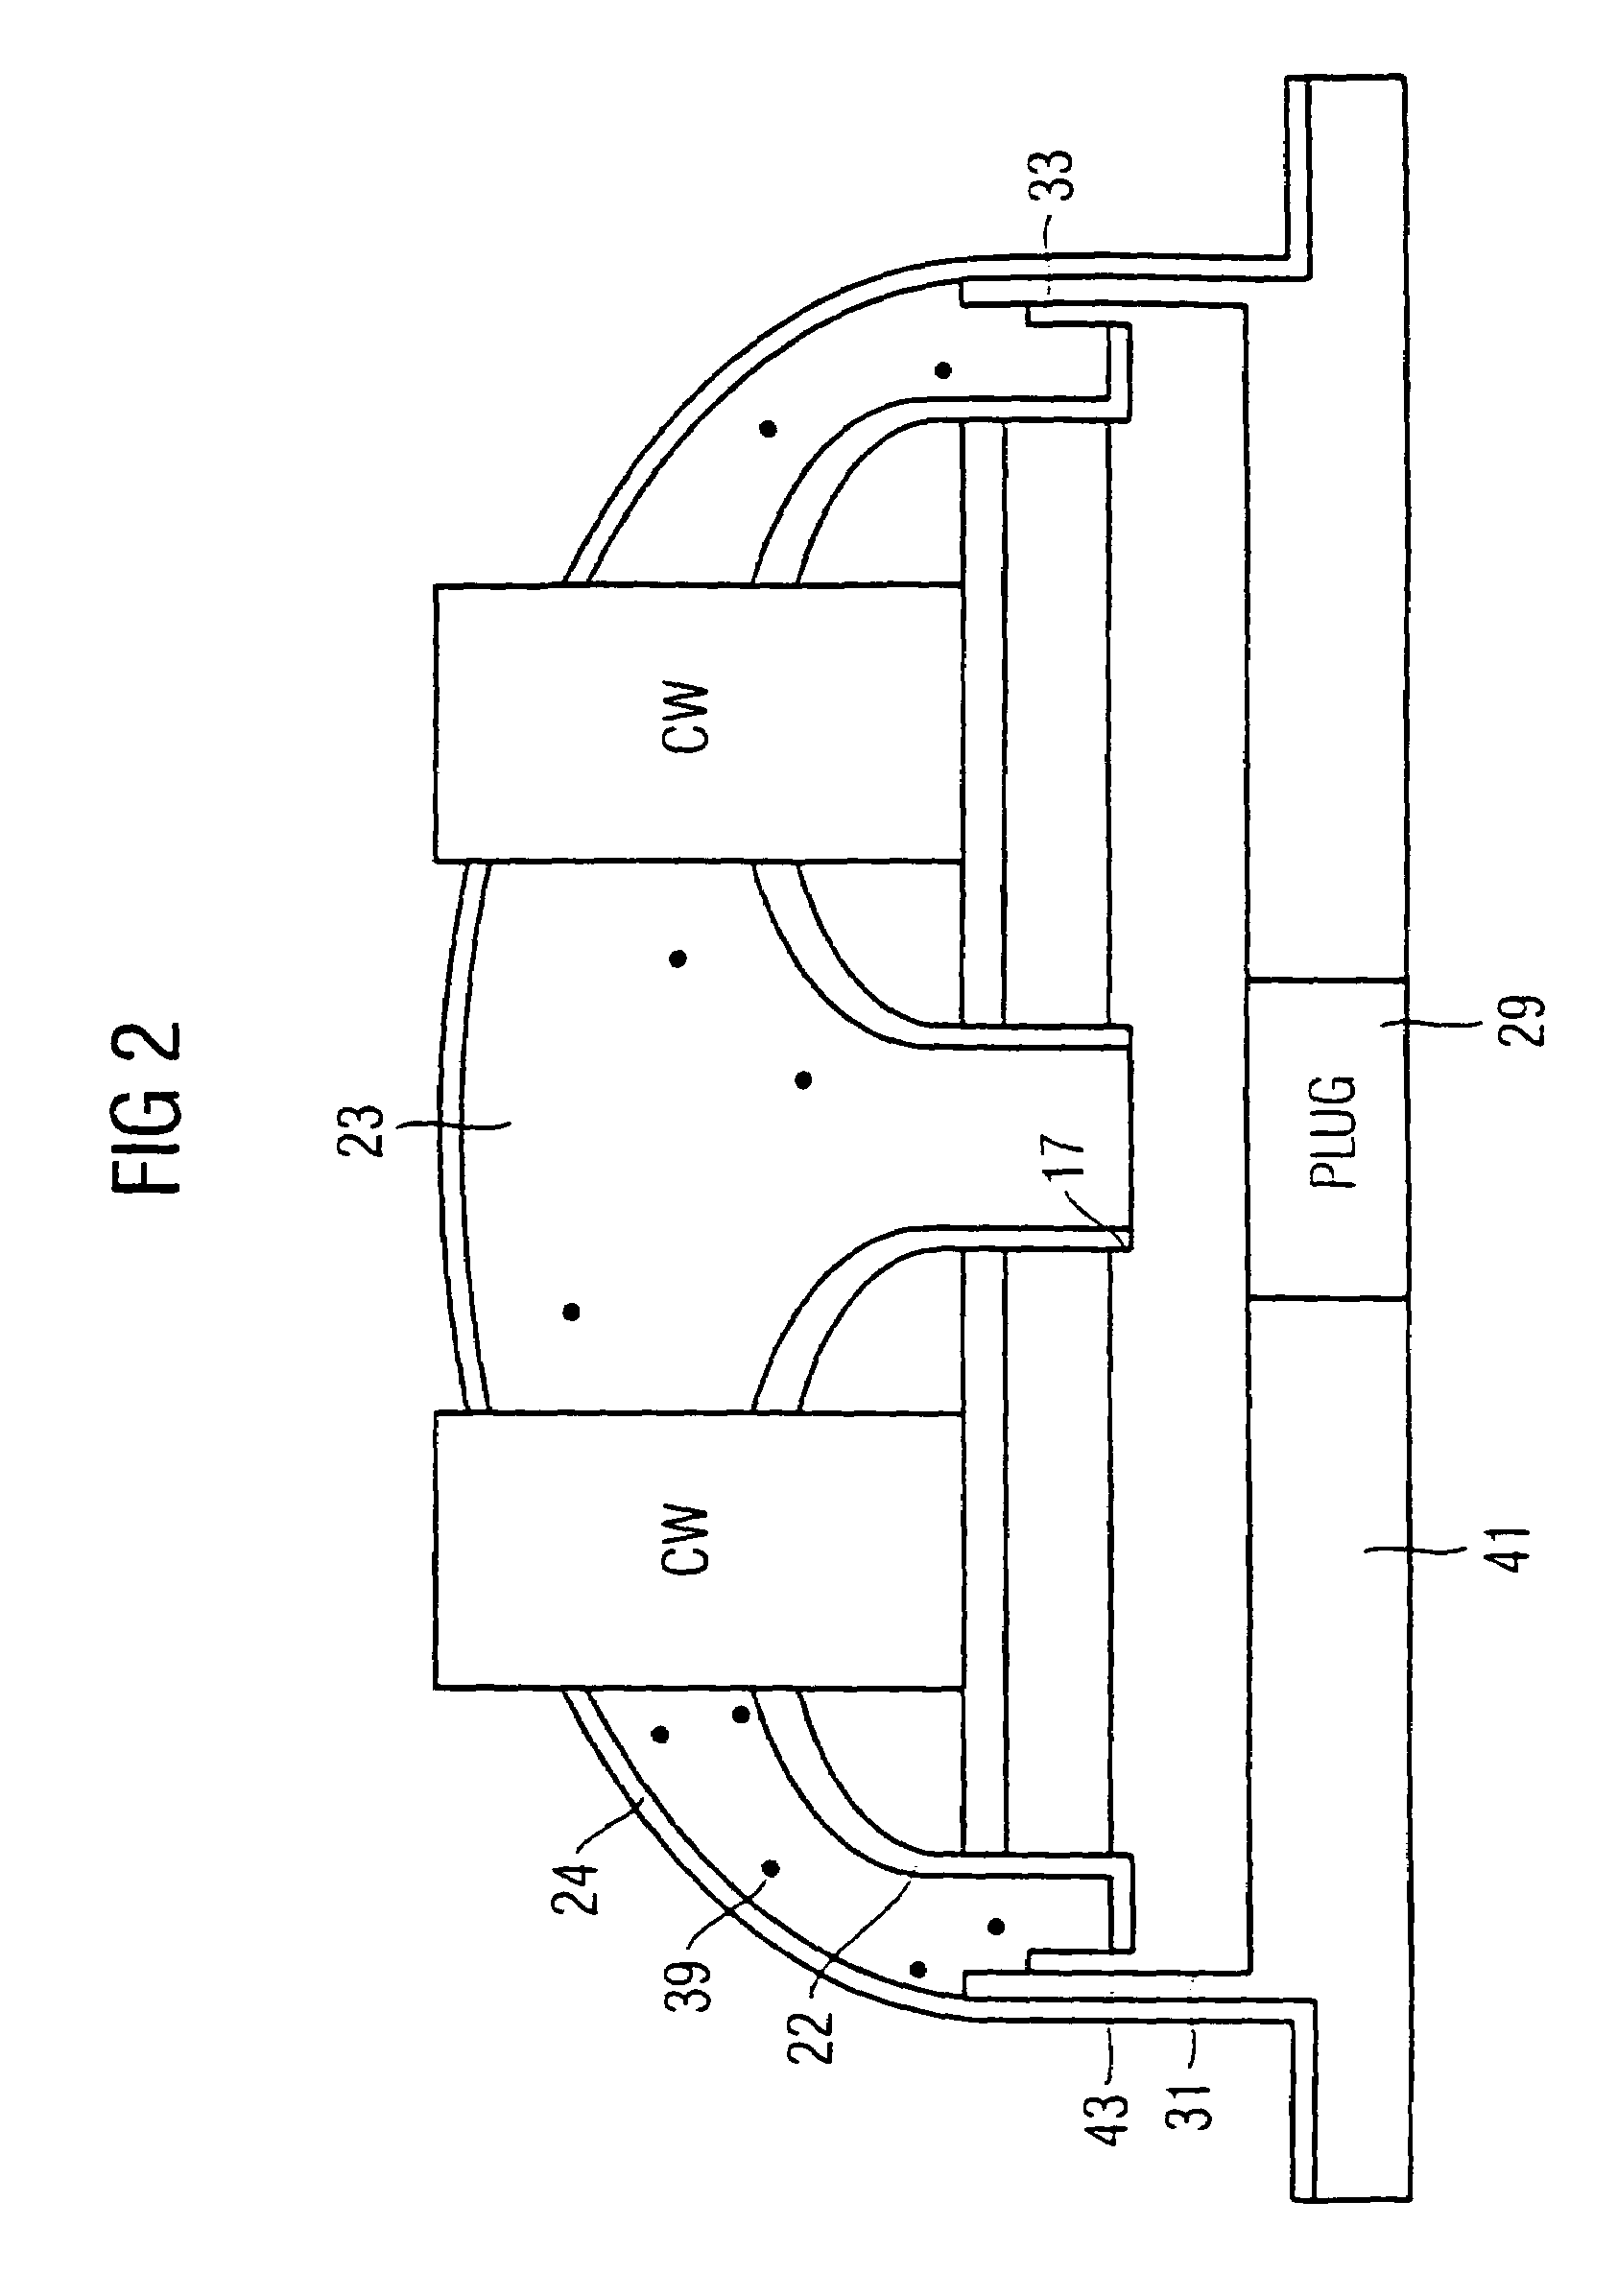 Sidewall structure and method of fabrication for reducing oxygen diffusion to contact plugs during CW hole reactive ion etch processing